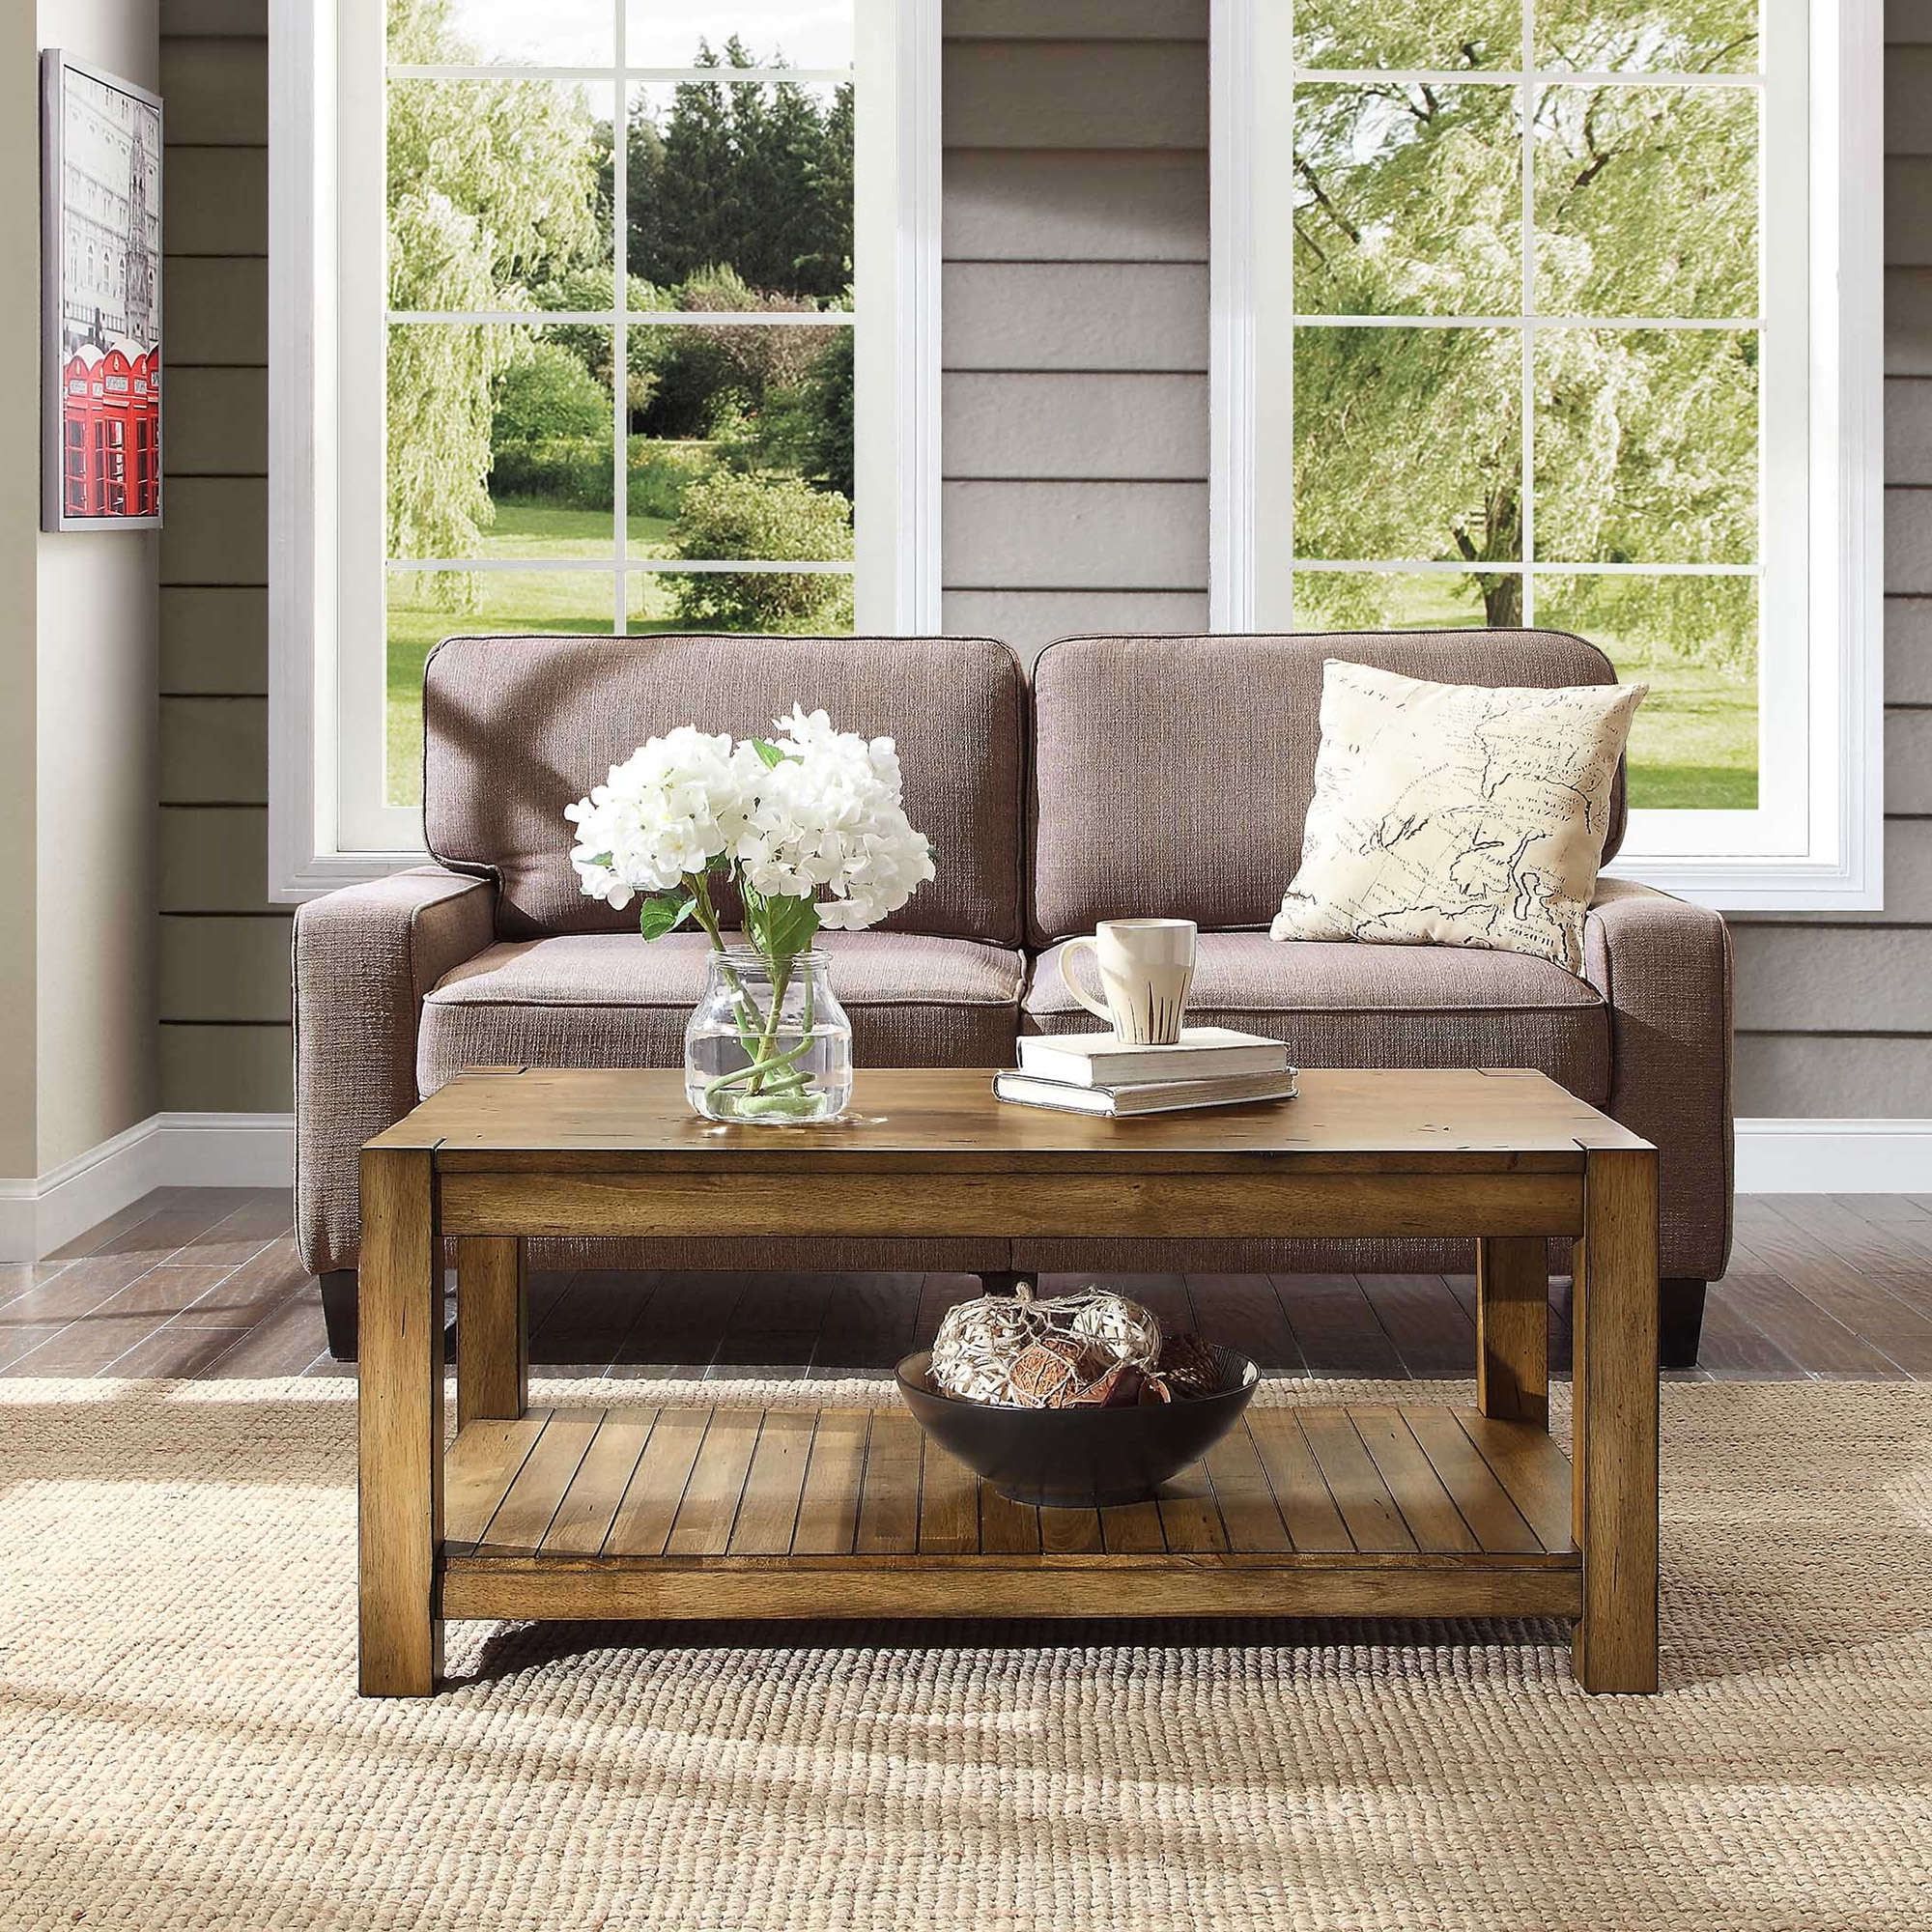 Most Popular Brown Rustic Coffee Tables Throughout Better Homes & Gardens Bryant Solid Wood Coffee Table, Rustic Maple Brown  Finish – Walmart (View 4 of 10)